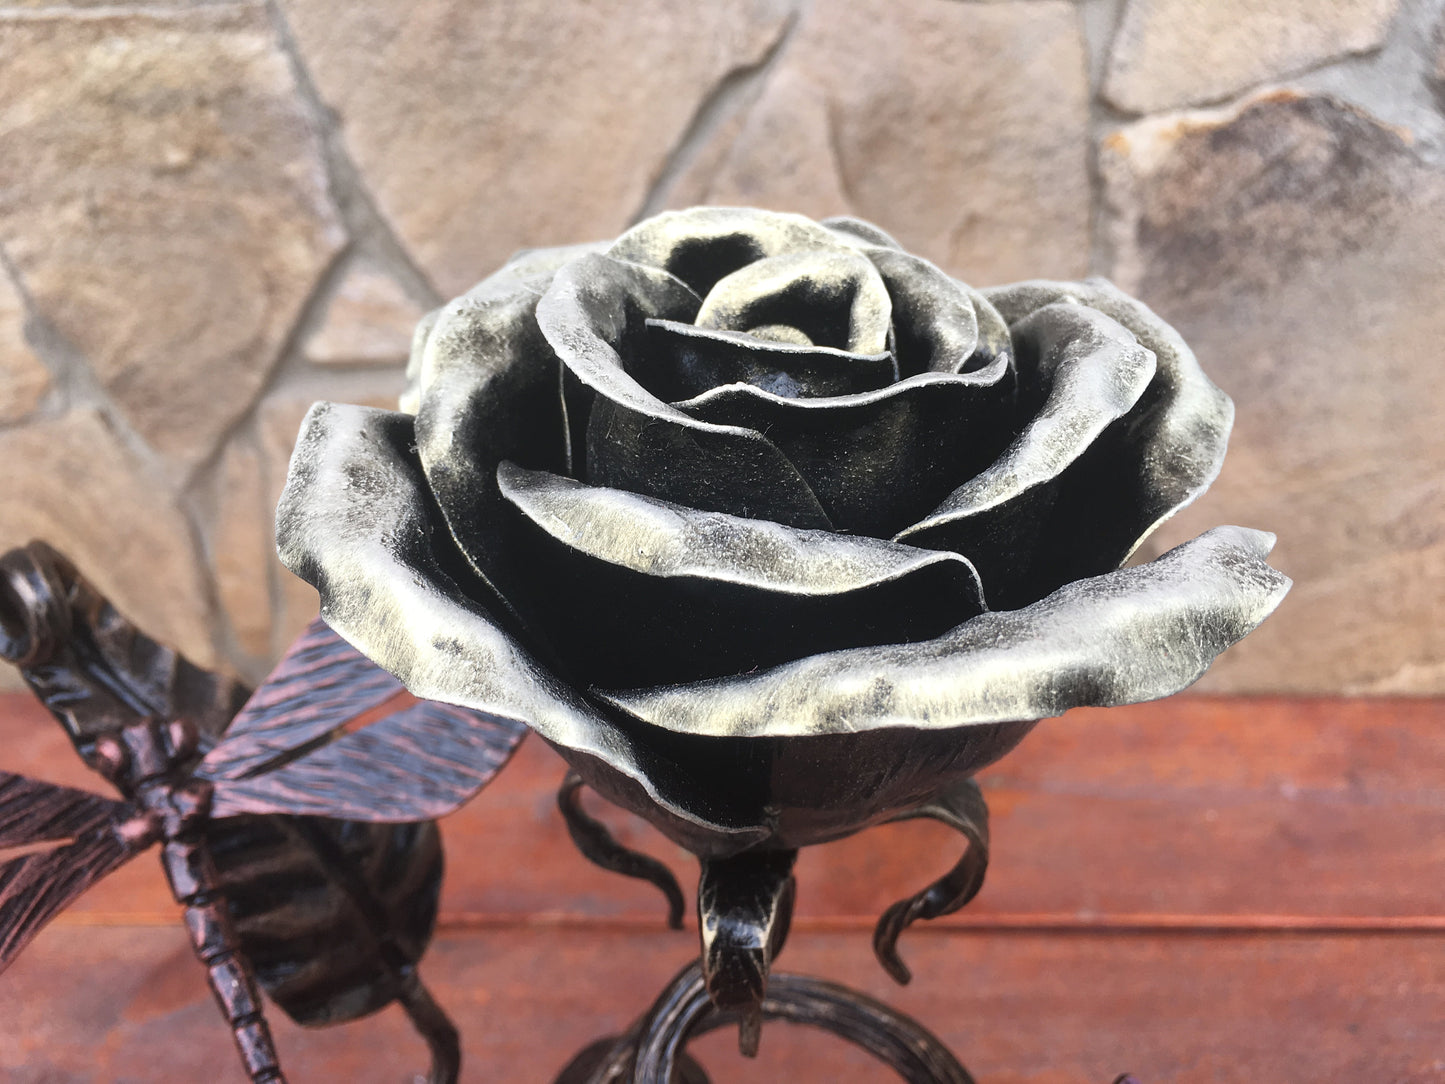 Metal rose, wedding anniversary gift, anniversary gift, wedding gift, Mother's day, Valentine's day gift,metal gift for her,hand forged rose